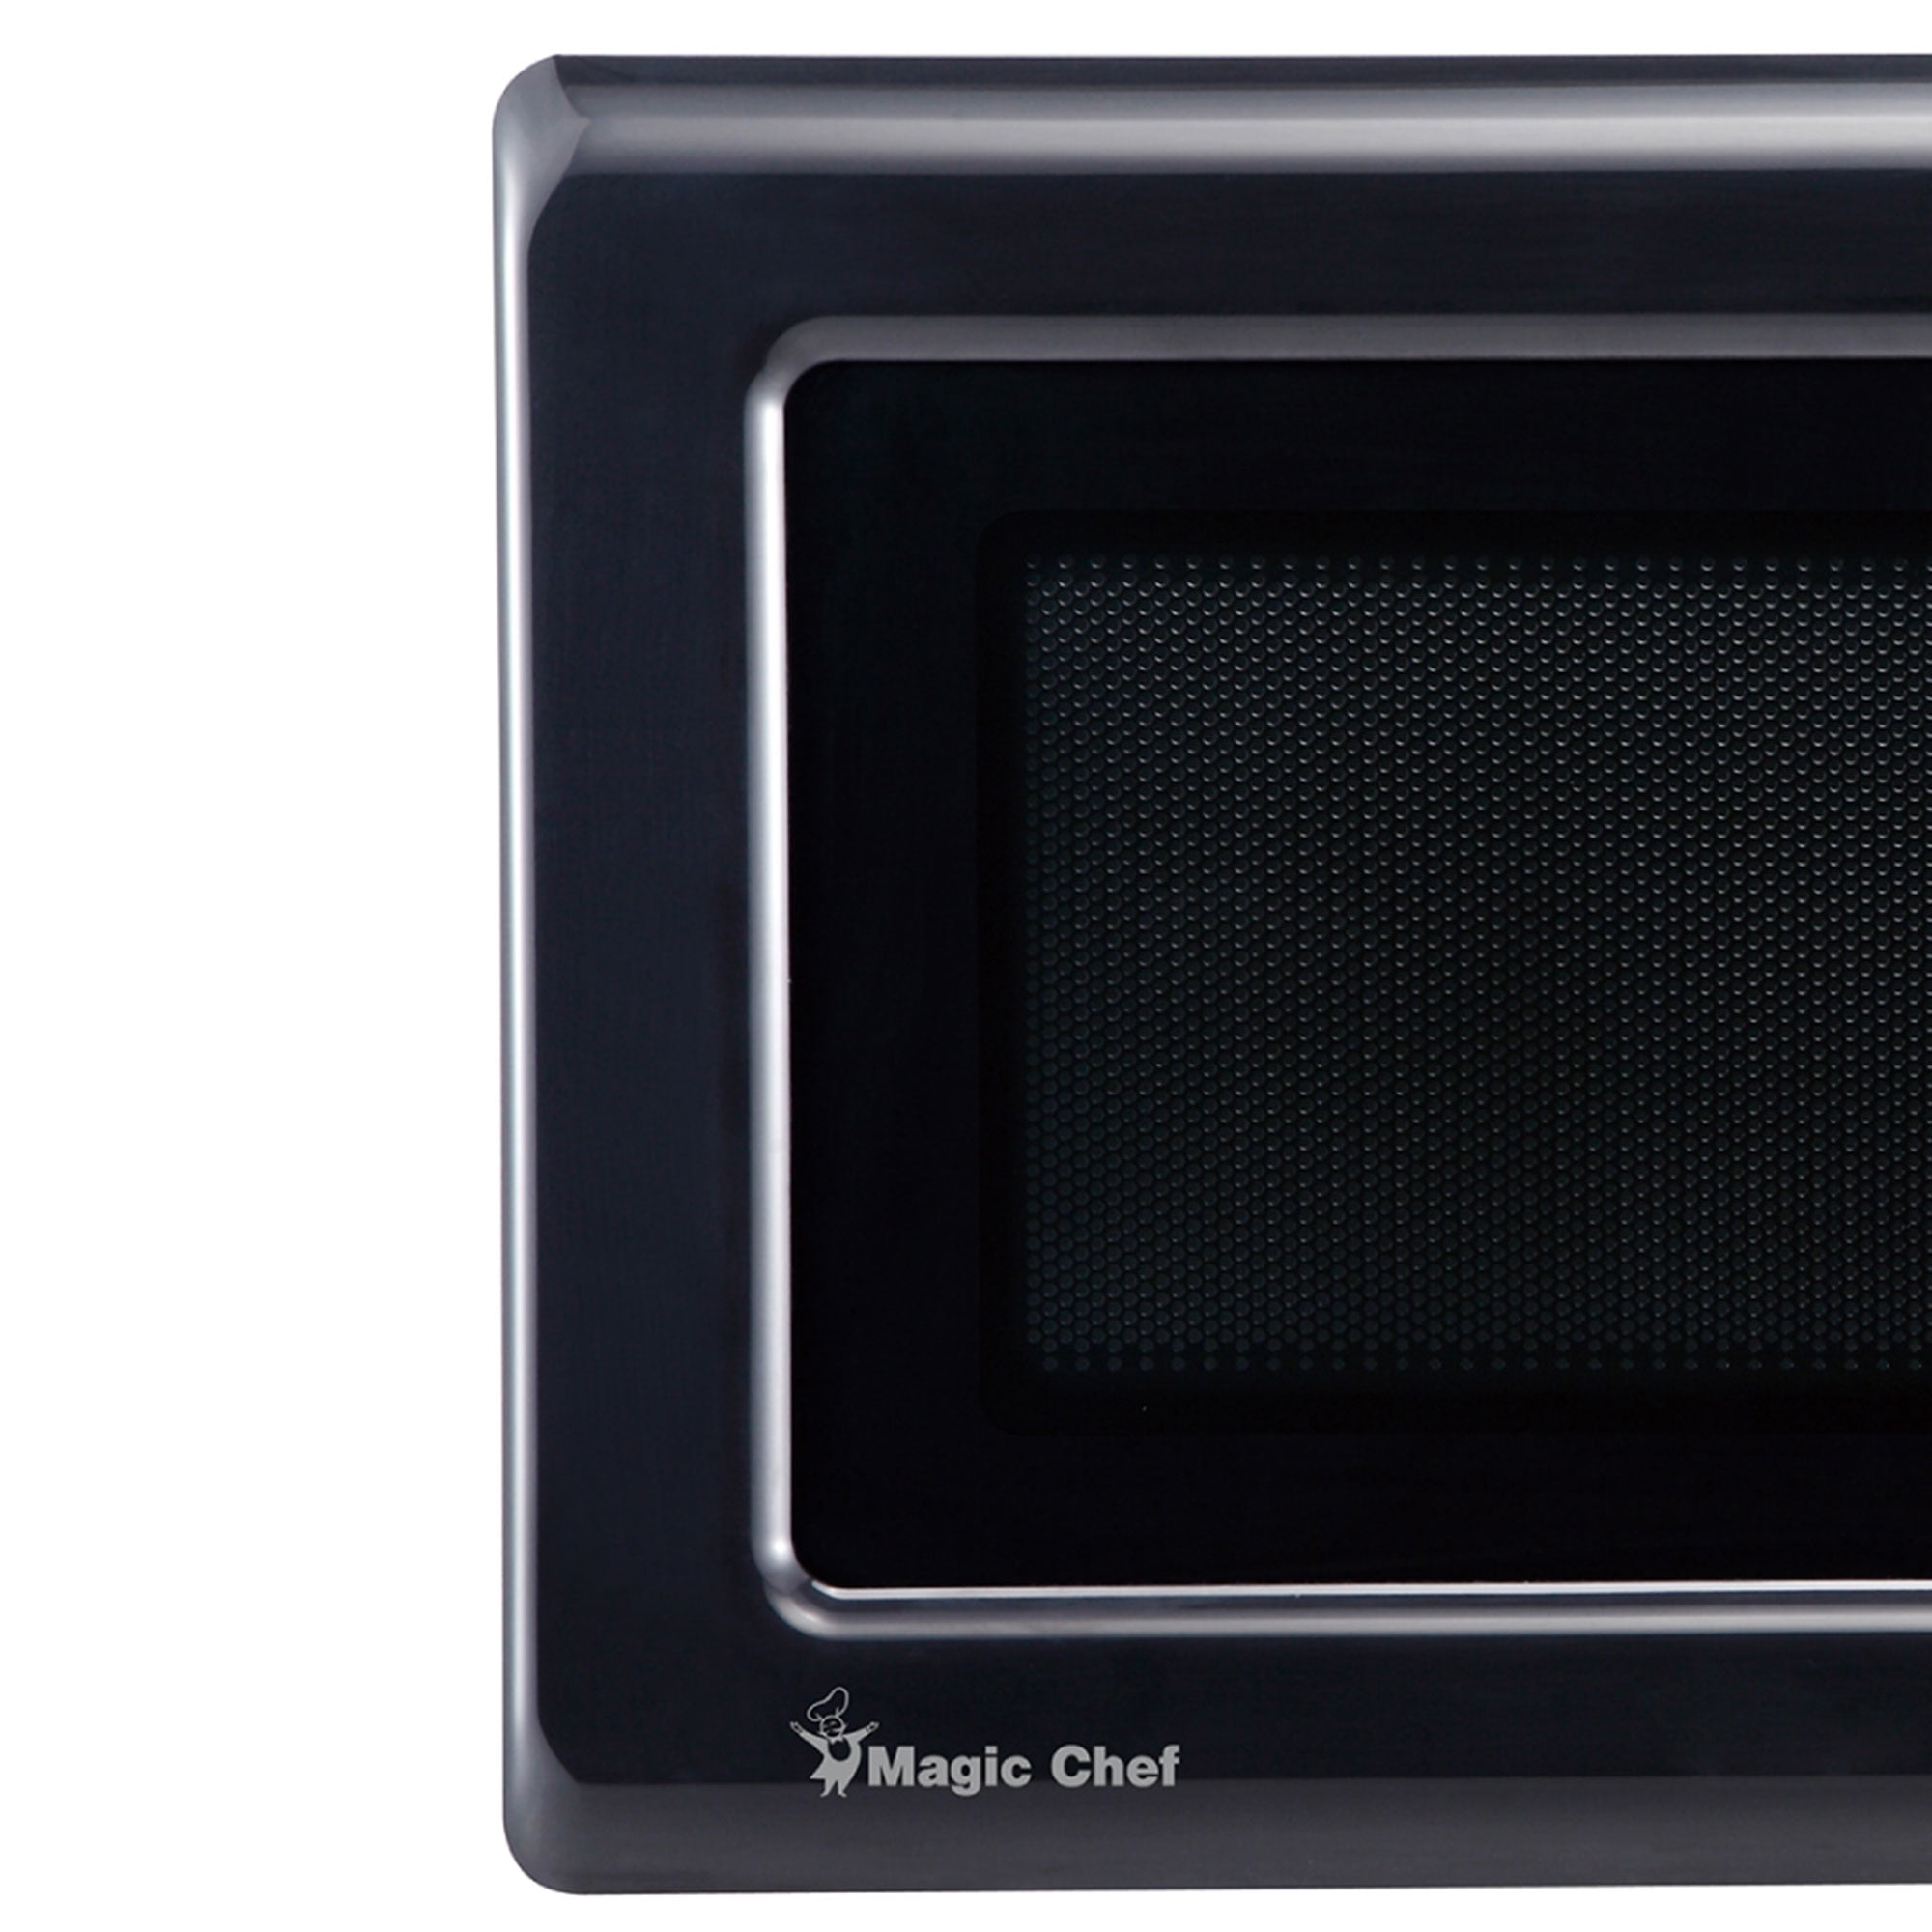 Magic Chef Countertop Microwave Oven - Black, 1.6 cu ft - King Soopers